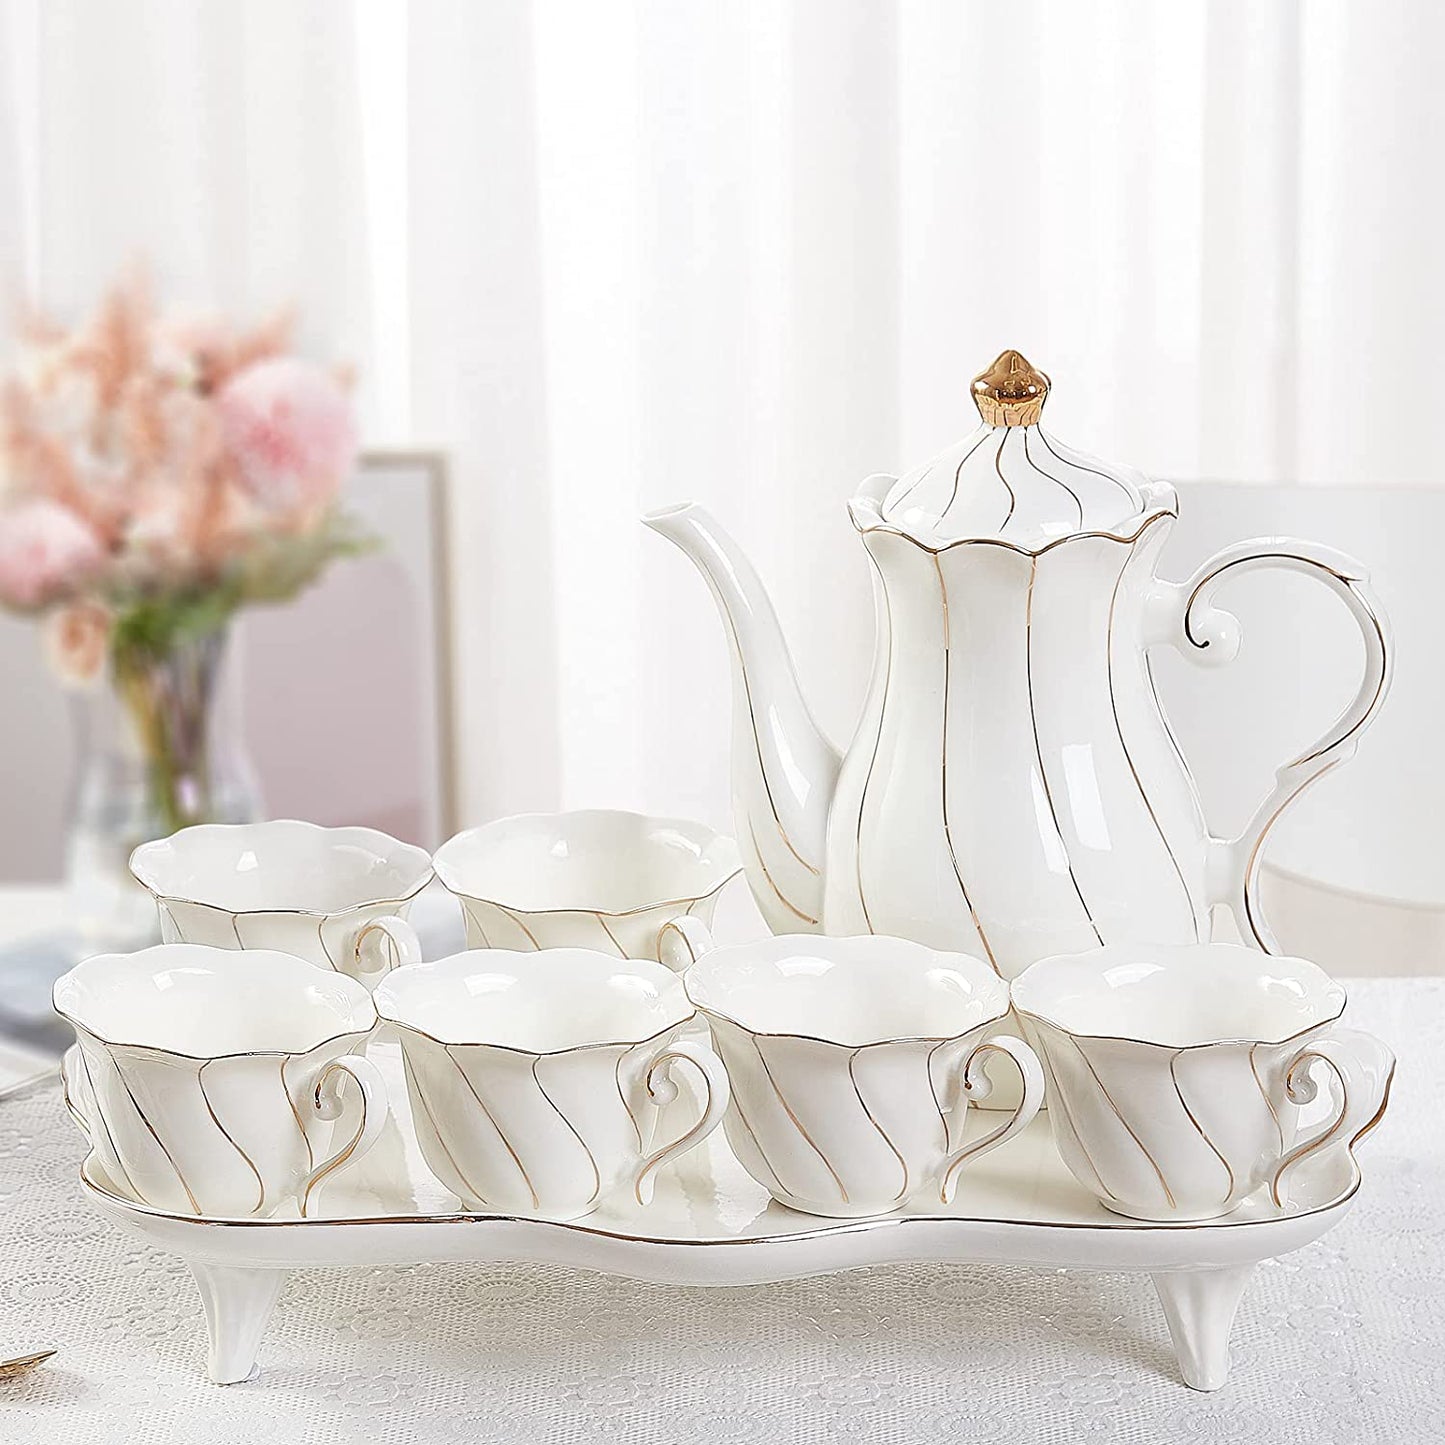 French Swirl Porcelain 14 pcs Tea Set for 6 with Tea Tray & Spoons